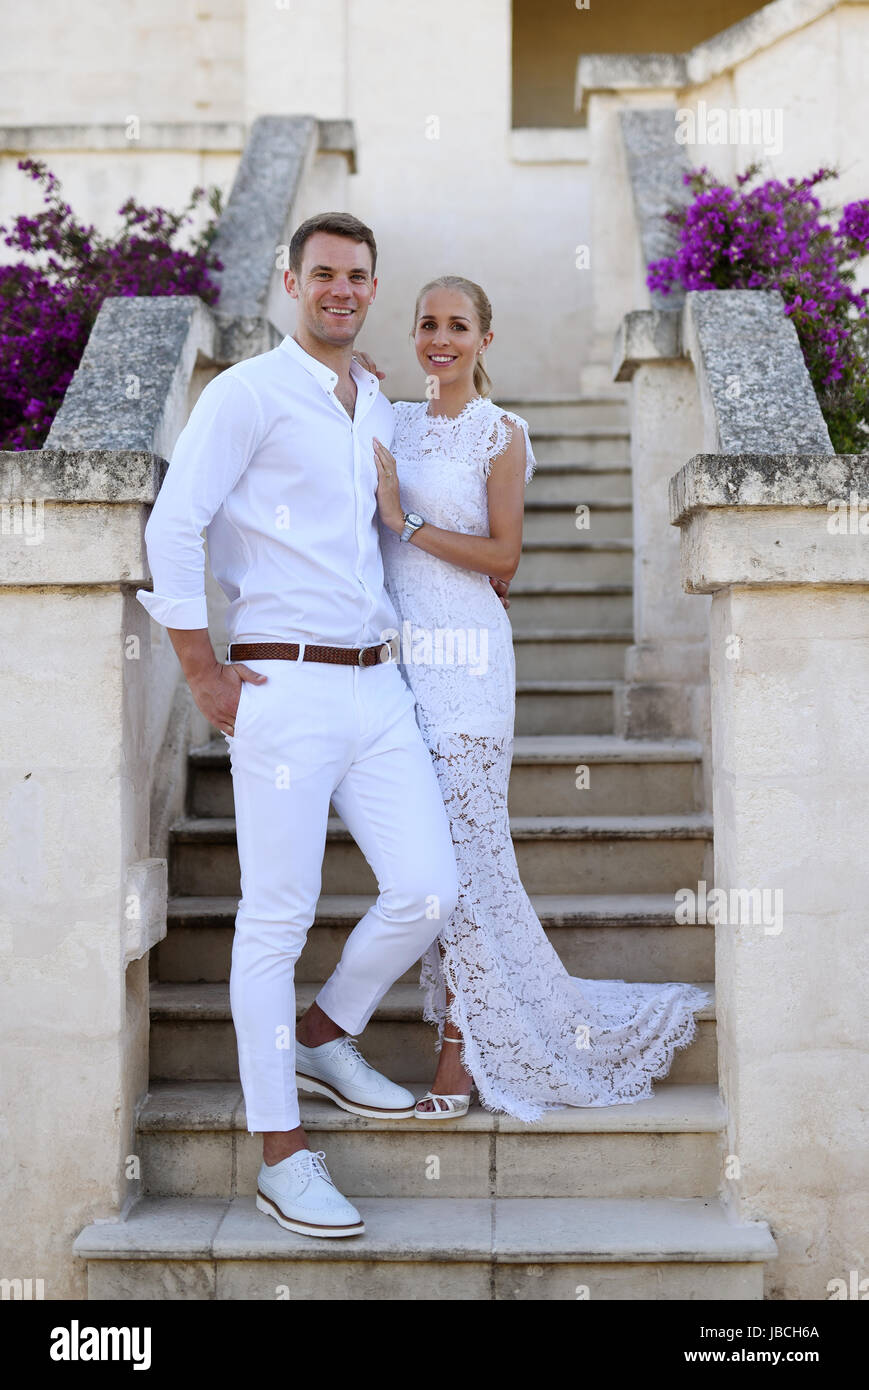 Monopoli, Italy. 09th June, 2017. dpatop - HANDOUT - A handout picture made available on 09 June 2017 shows German soccer national player and German Bundesliga goalkeeper of the FC Bayern Munich, Manuel Neuer, and his wife Nina Neuer (née Weiss) shortly after the church wedding in Monopoli, Italy, 09 June 2017. (ATTENTION EDITORS: FOR EDITORIAL USE ONLY IN CONNECTION WITH CURRENT REPORTING/ MANDATORY CREDIT) · NO WIRE SERVICE · Photo: Pia Clodi/peachesandmint.com/dpa/Alamy Live News Stock Photo